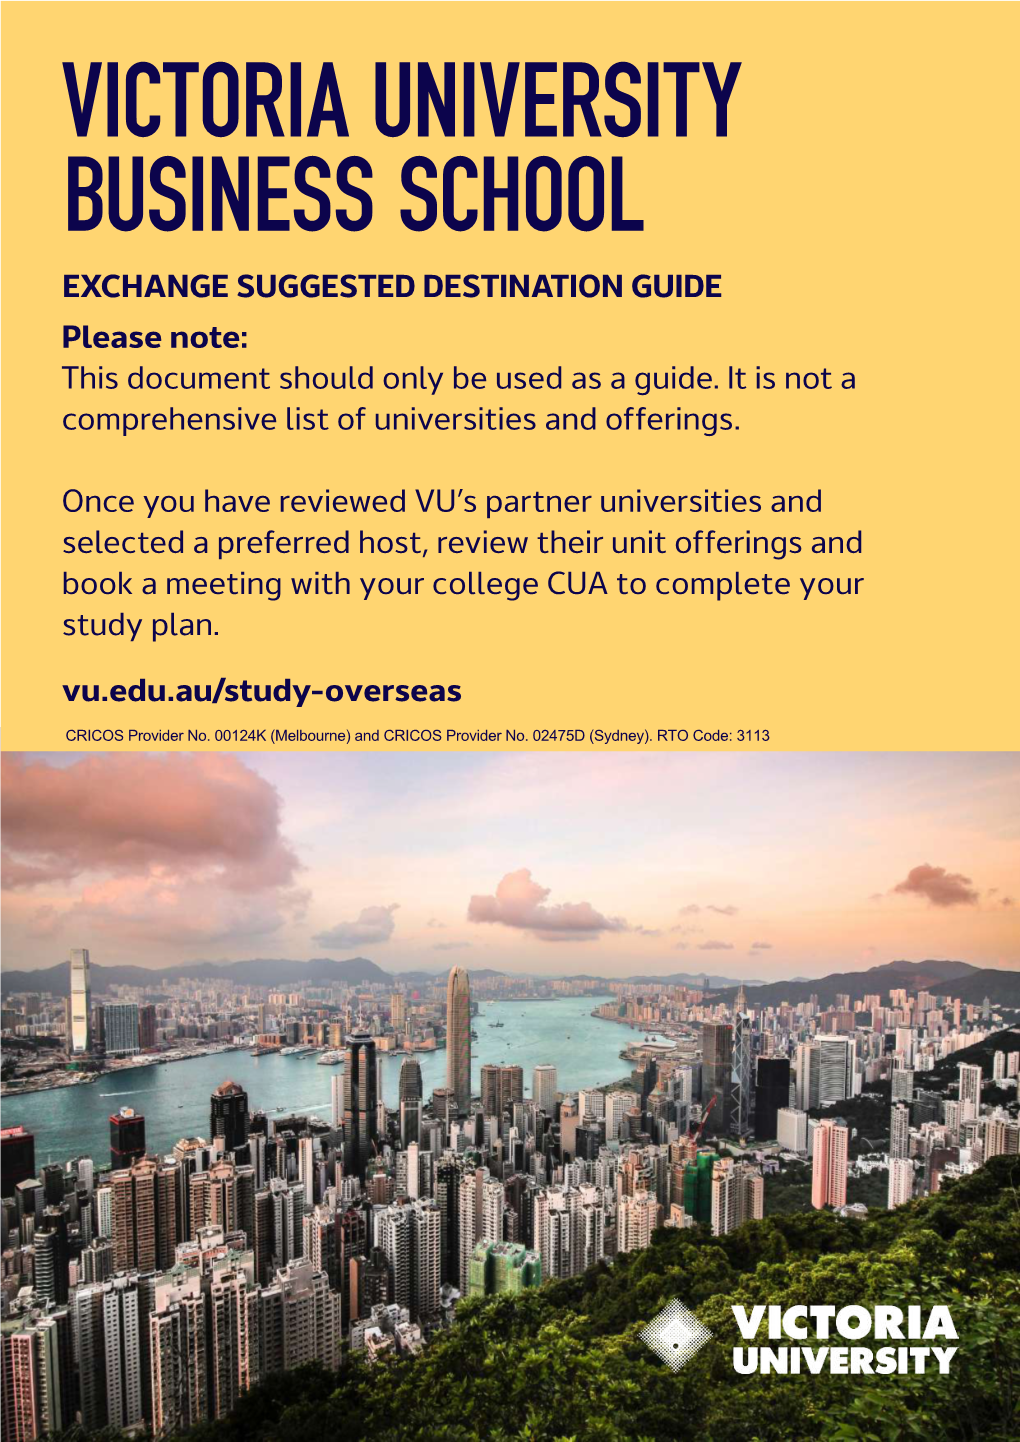 VICTORIA UNIVERSITY BUSINESS SCHOOL EXCHANGE SUGGESTED DESTINATION GUIDE Please Note: This Document Should Only Be Used As a Guide